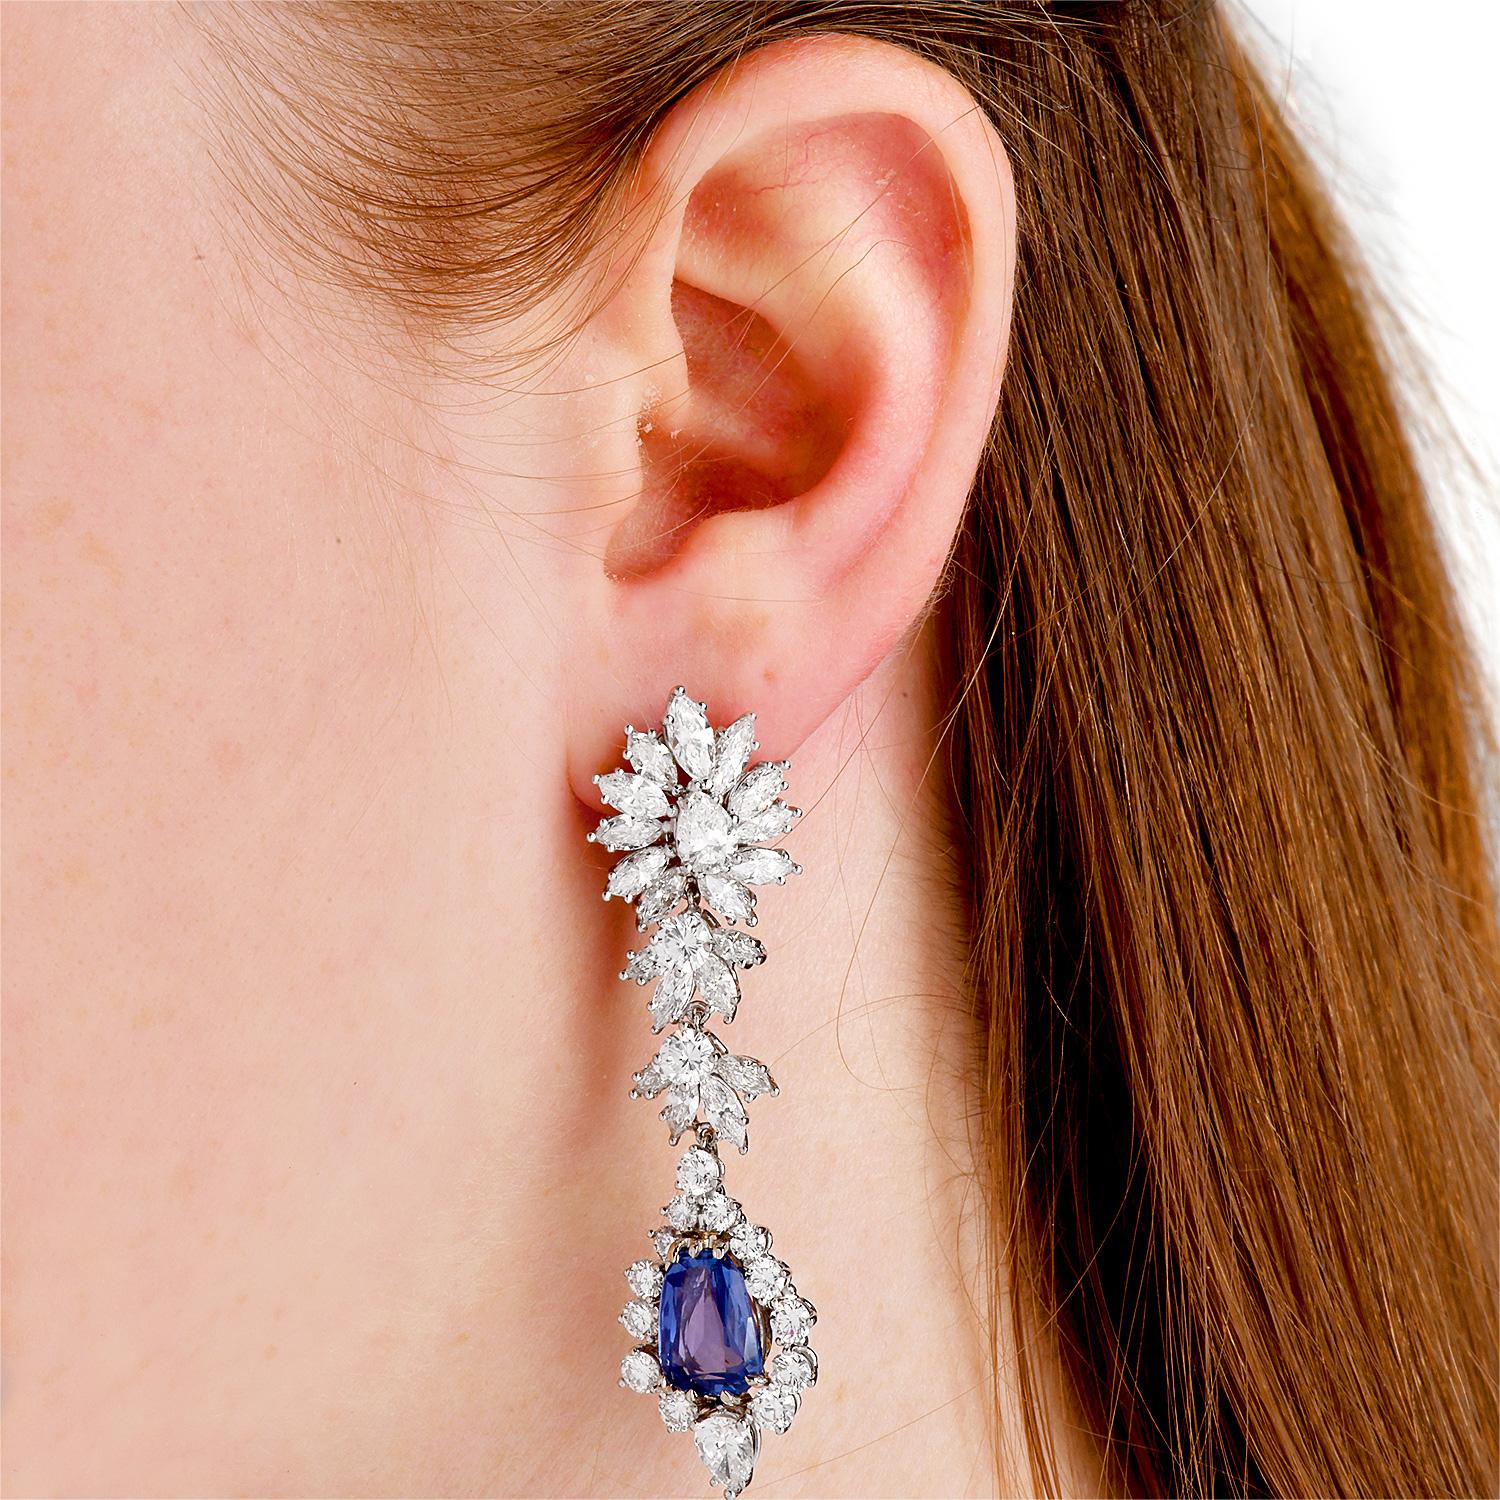 hese gorgeous Estate Diamond No-Heat Ceylon Sapphire Platinum Earrings! 

They display two bright genuine Blue sapphires, Ceylon Origin without any treatments ( No Heat), tapered cushion-cut, prong-set, approximately 8.27 in total ( one 4.12 carats